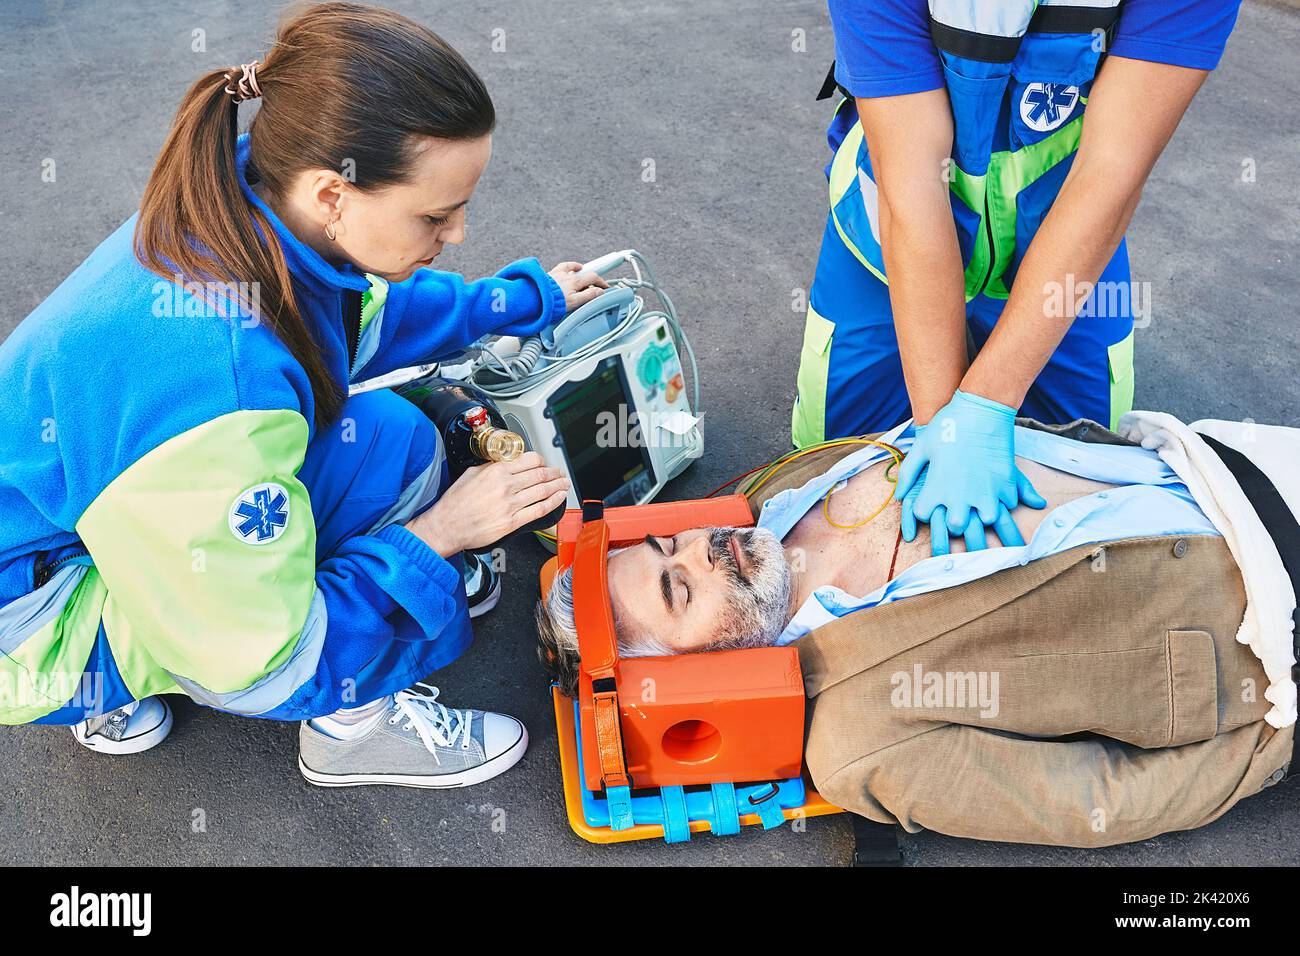 First aid. Cardiopulmonary resuscitation and chest compressions to injured unconscious male from ambulance workers Stock Photo